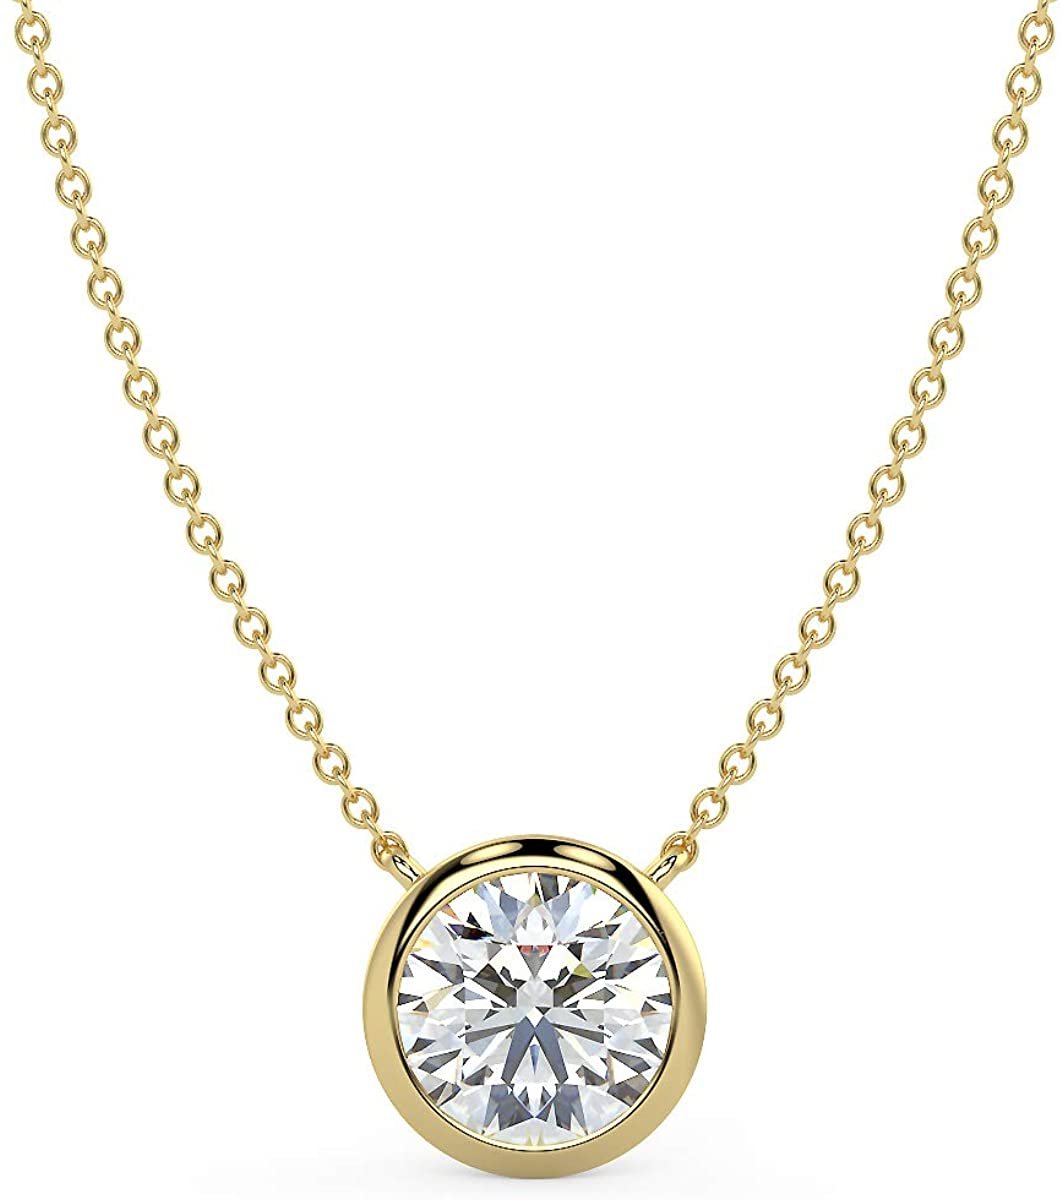 IGI Certified 14K Gold 1.0 or 1-1/2 Carat Round Brilliant-Cut Lab Created Diamond Bezel-Set Solitaire Pendant Necklace (J-K Color, SI2-I1 Clarity), 18" - Choice of Gold Color